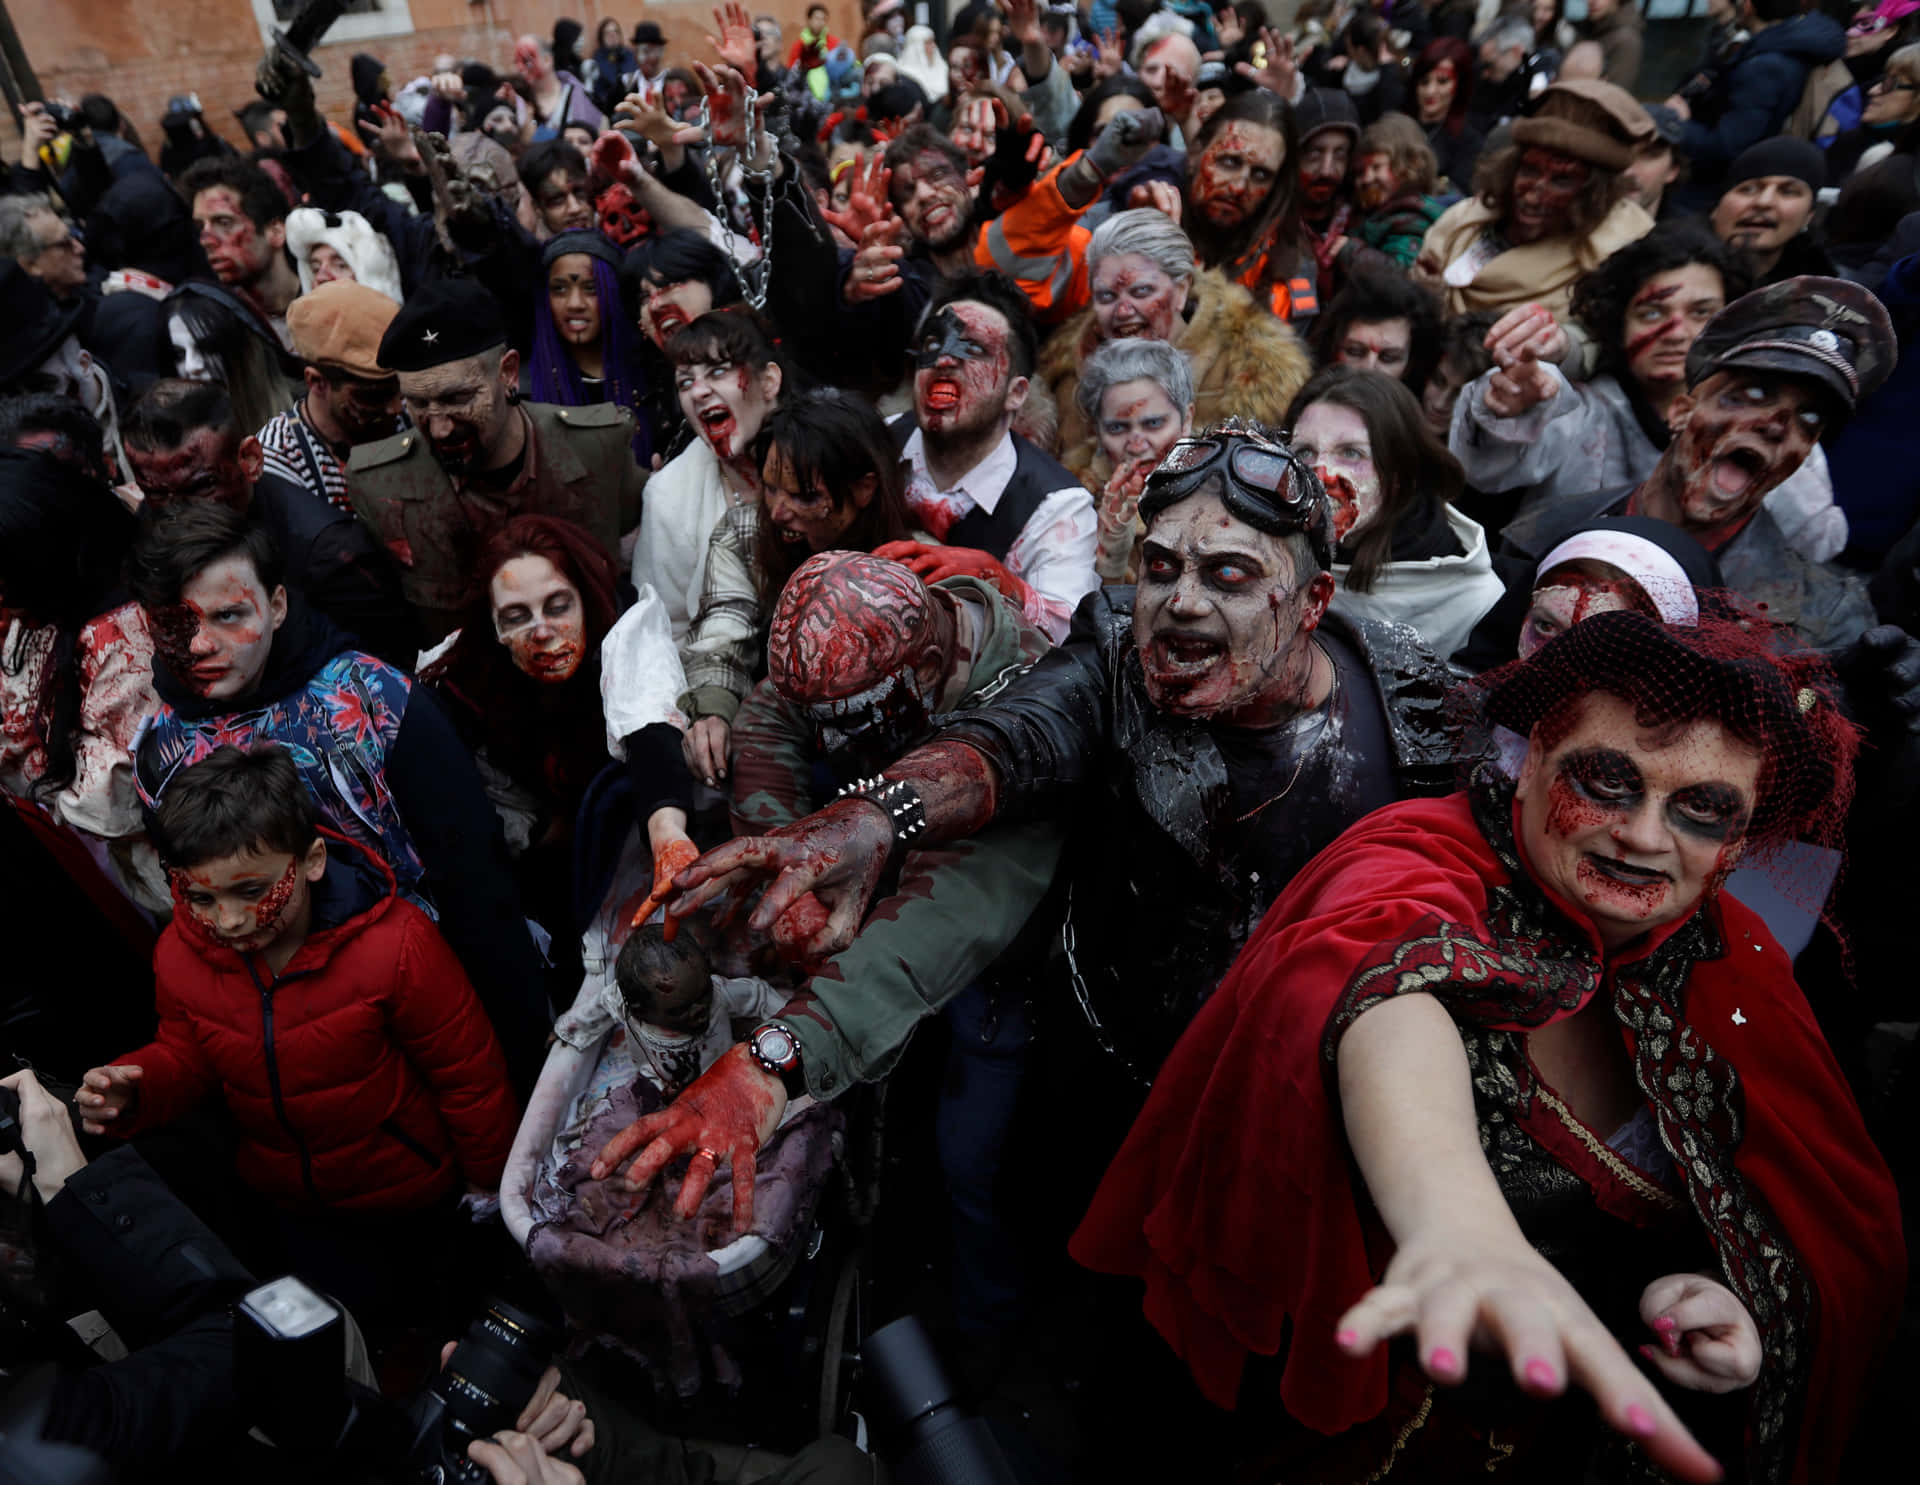 pictures of real zombies